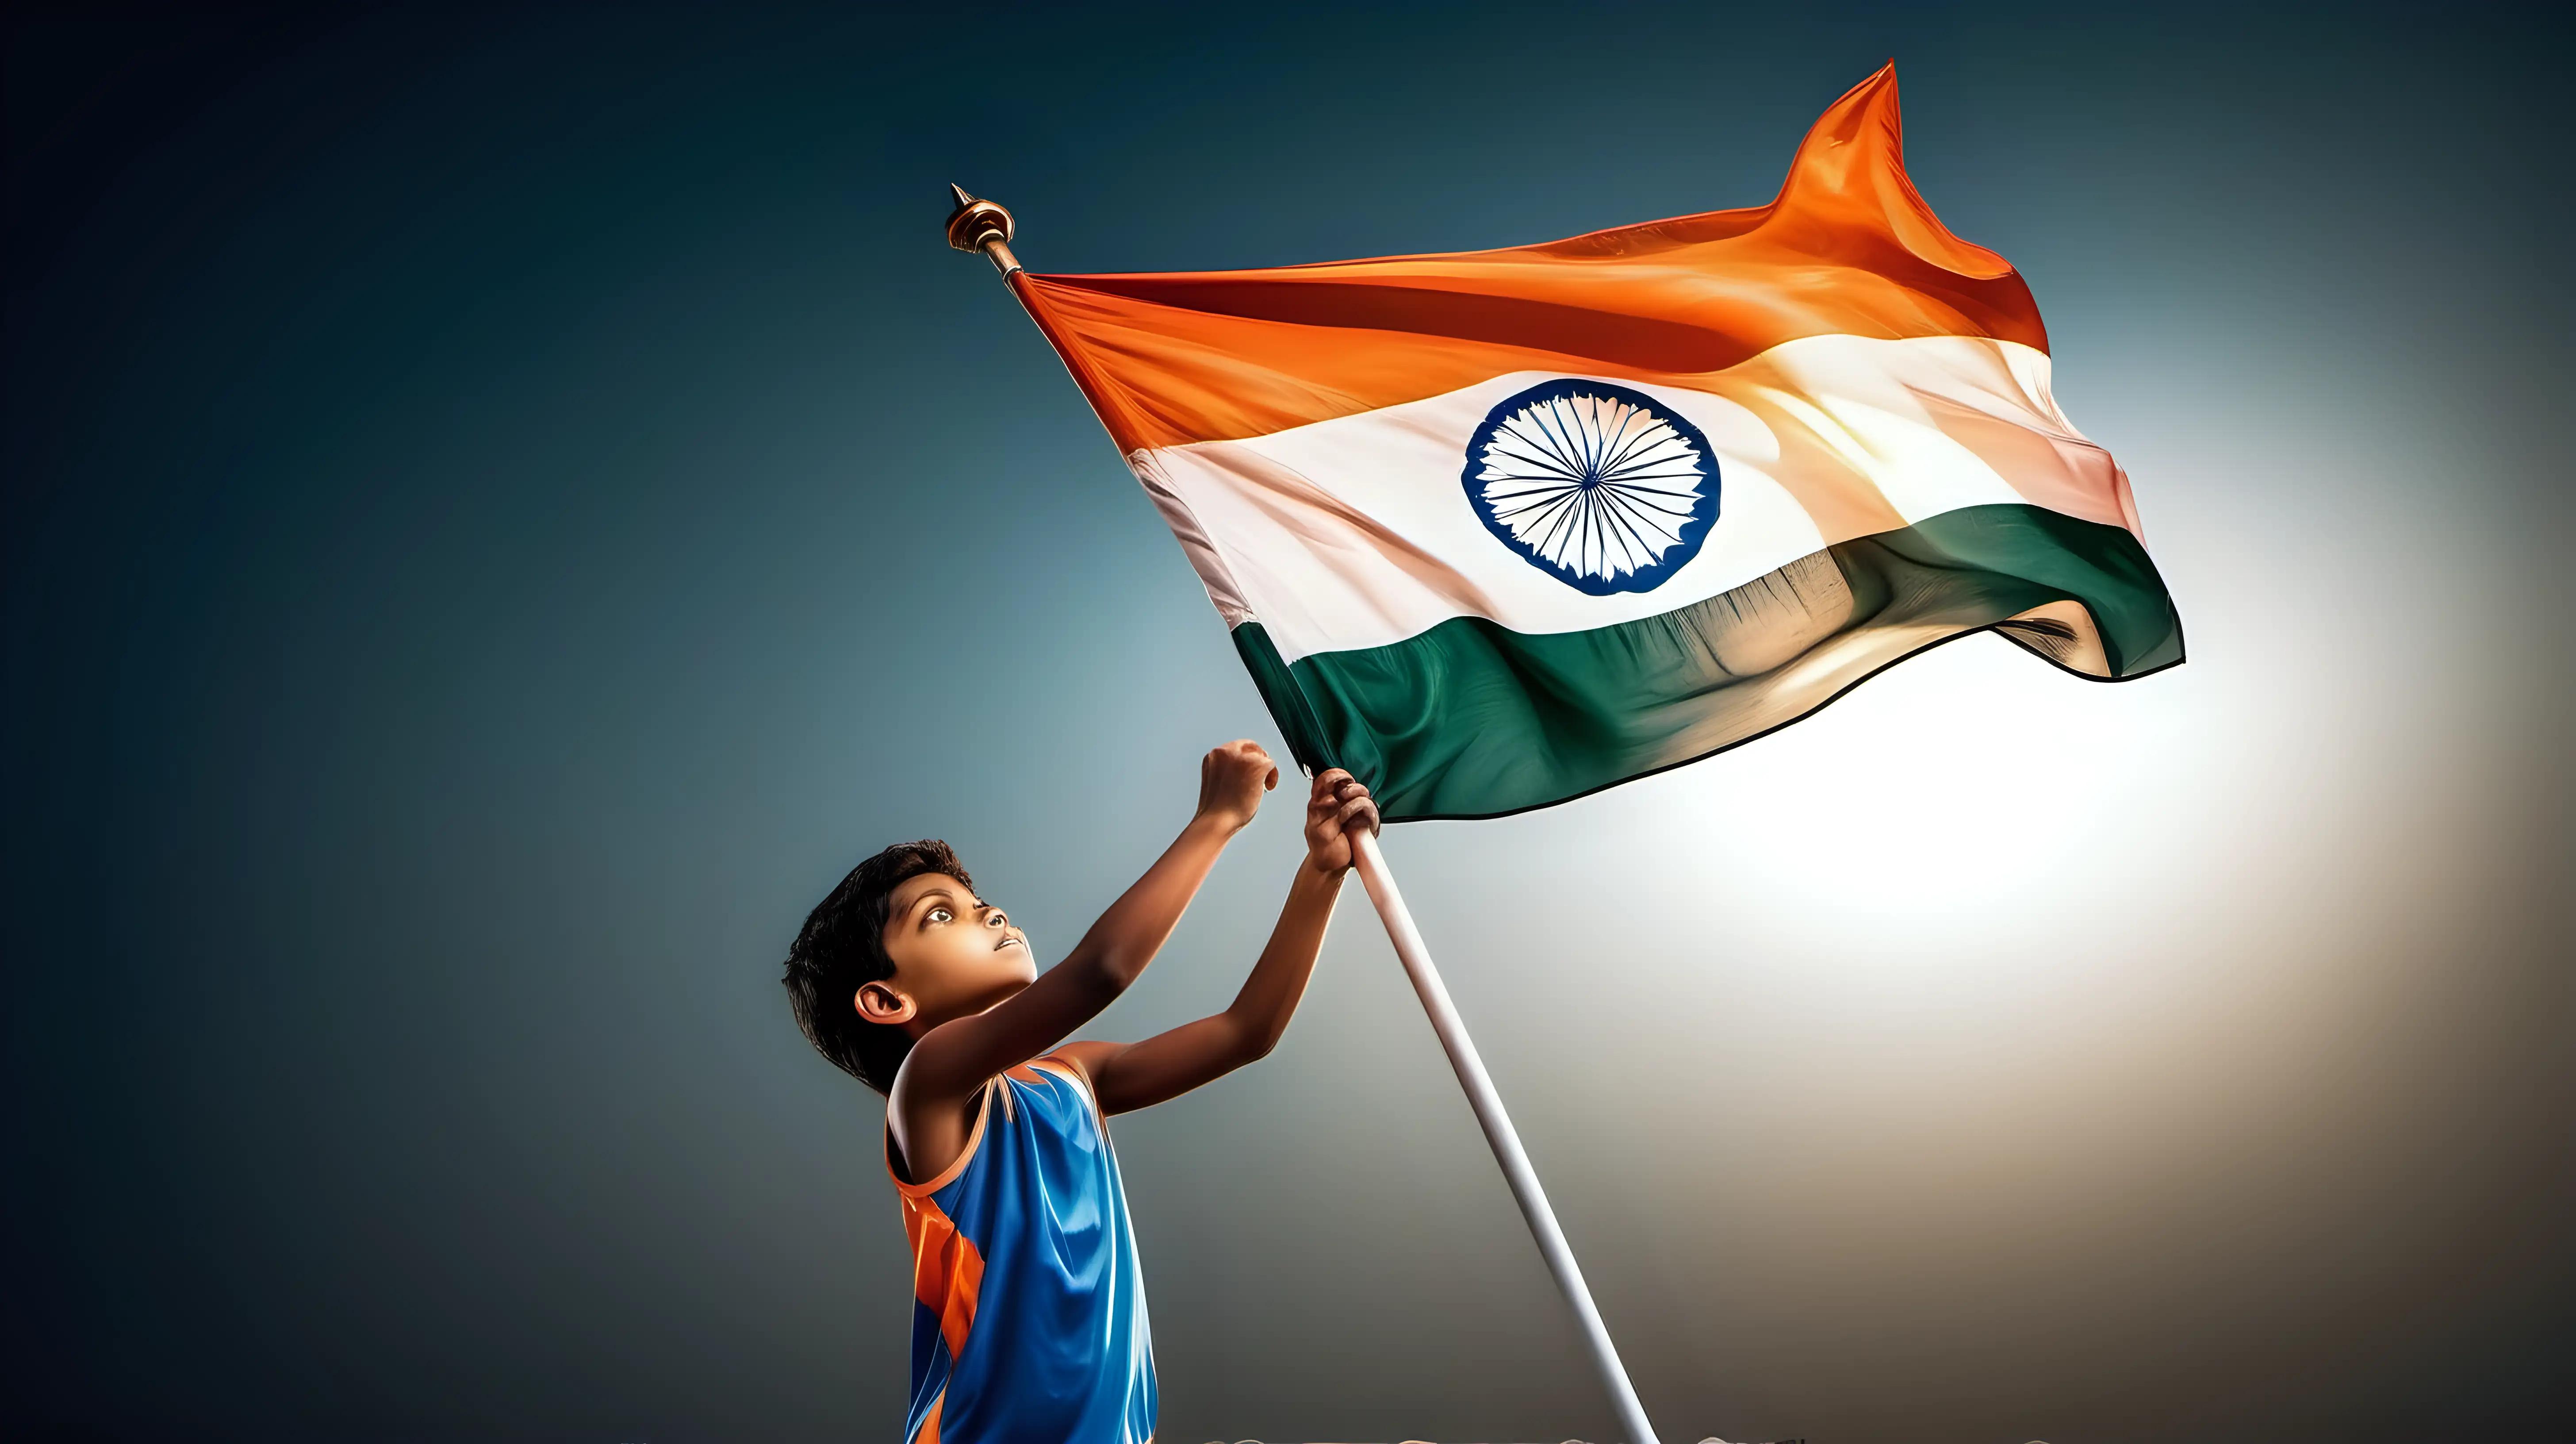 A young athlete raising a glowing Indian flag high above their head, the luminous display symbolizing their dedication to representing their country with honor and excellence in sports, inspiring fellow citizens with their patriotism and athleticism.